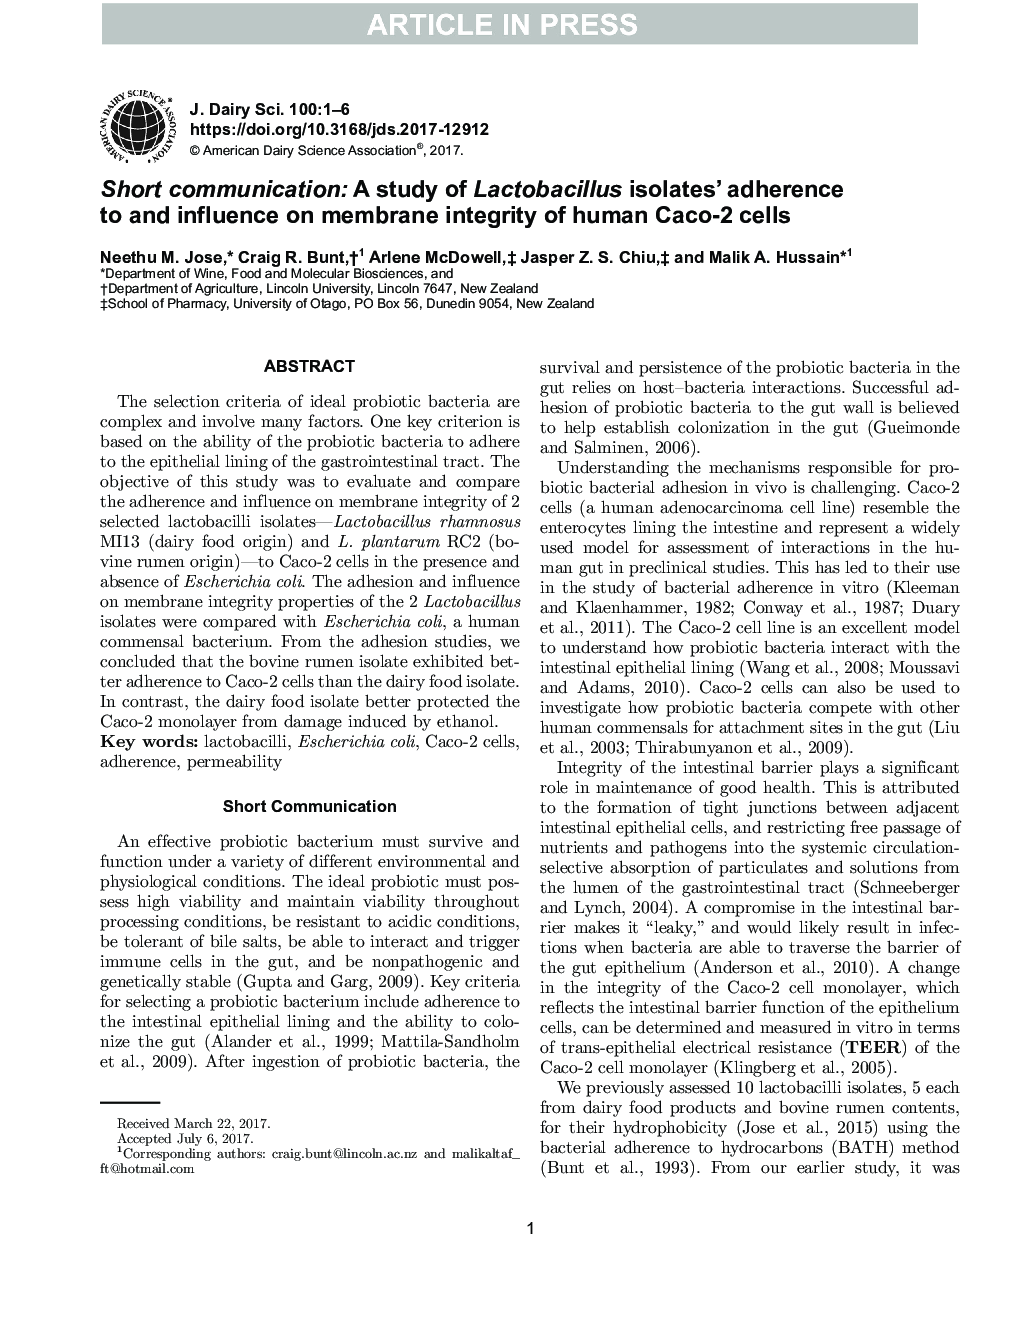 Short communication: A study of Lactobacillus isolates' adherence to and influence on membrane integrity of human Caco-2 cells